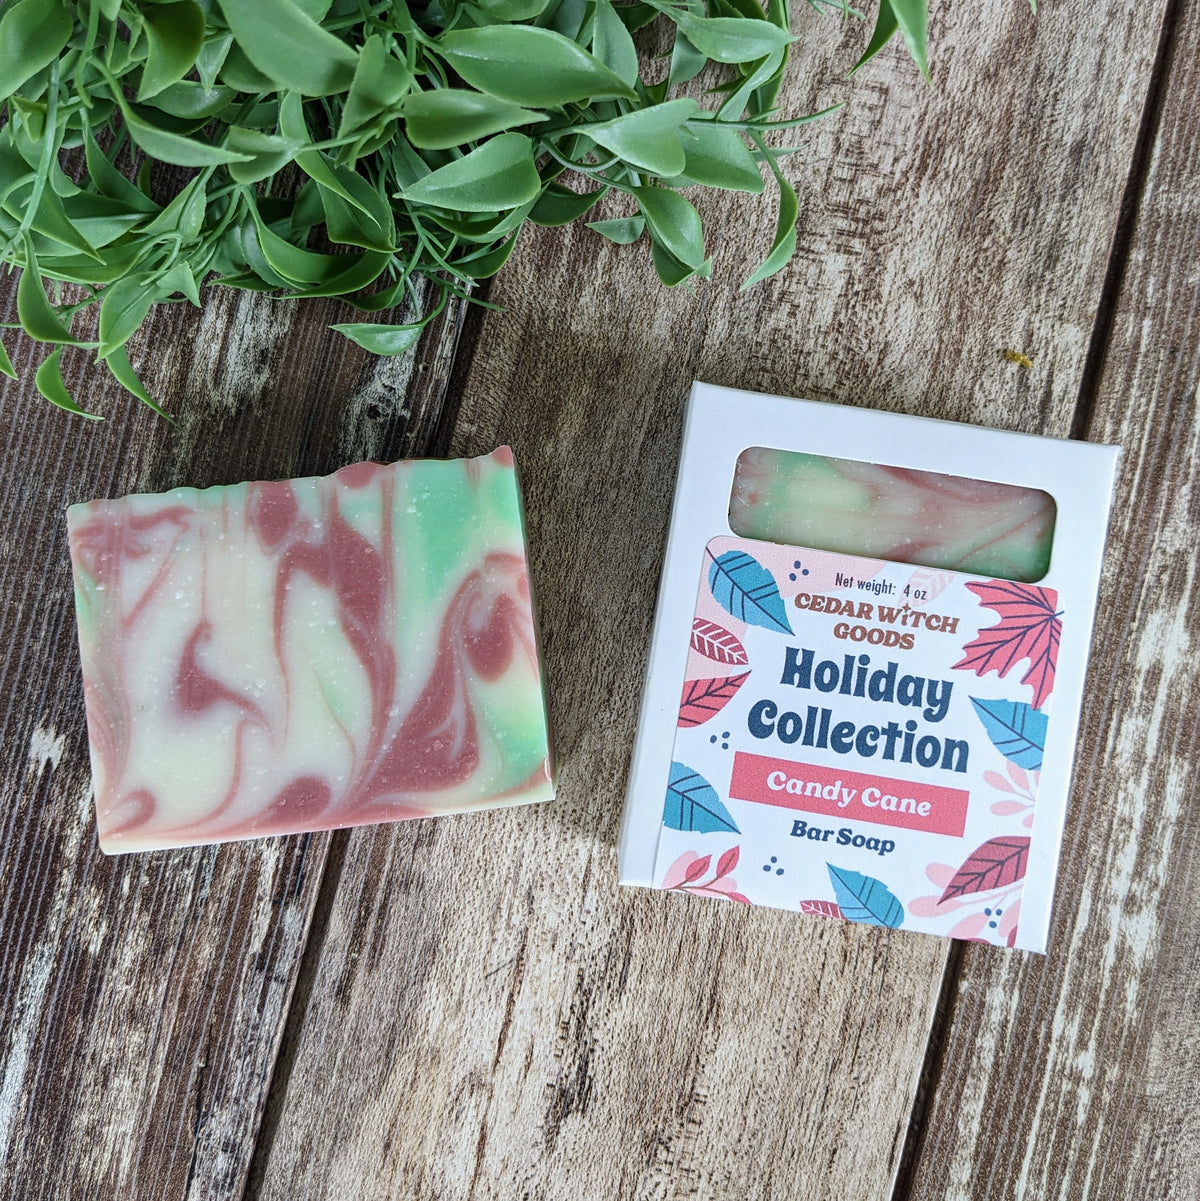 Candy Cane soap